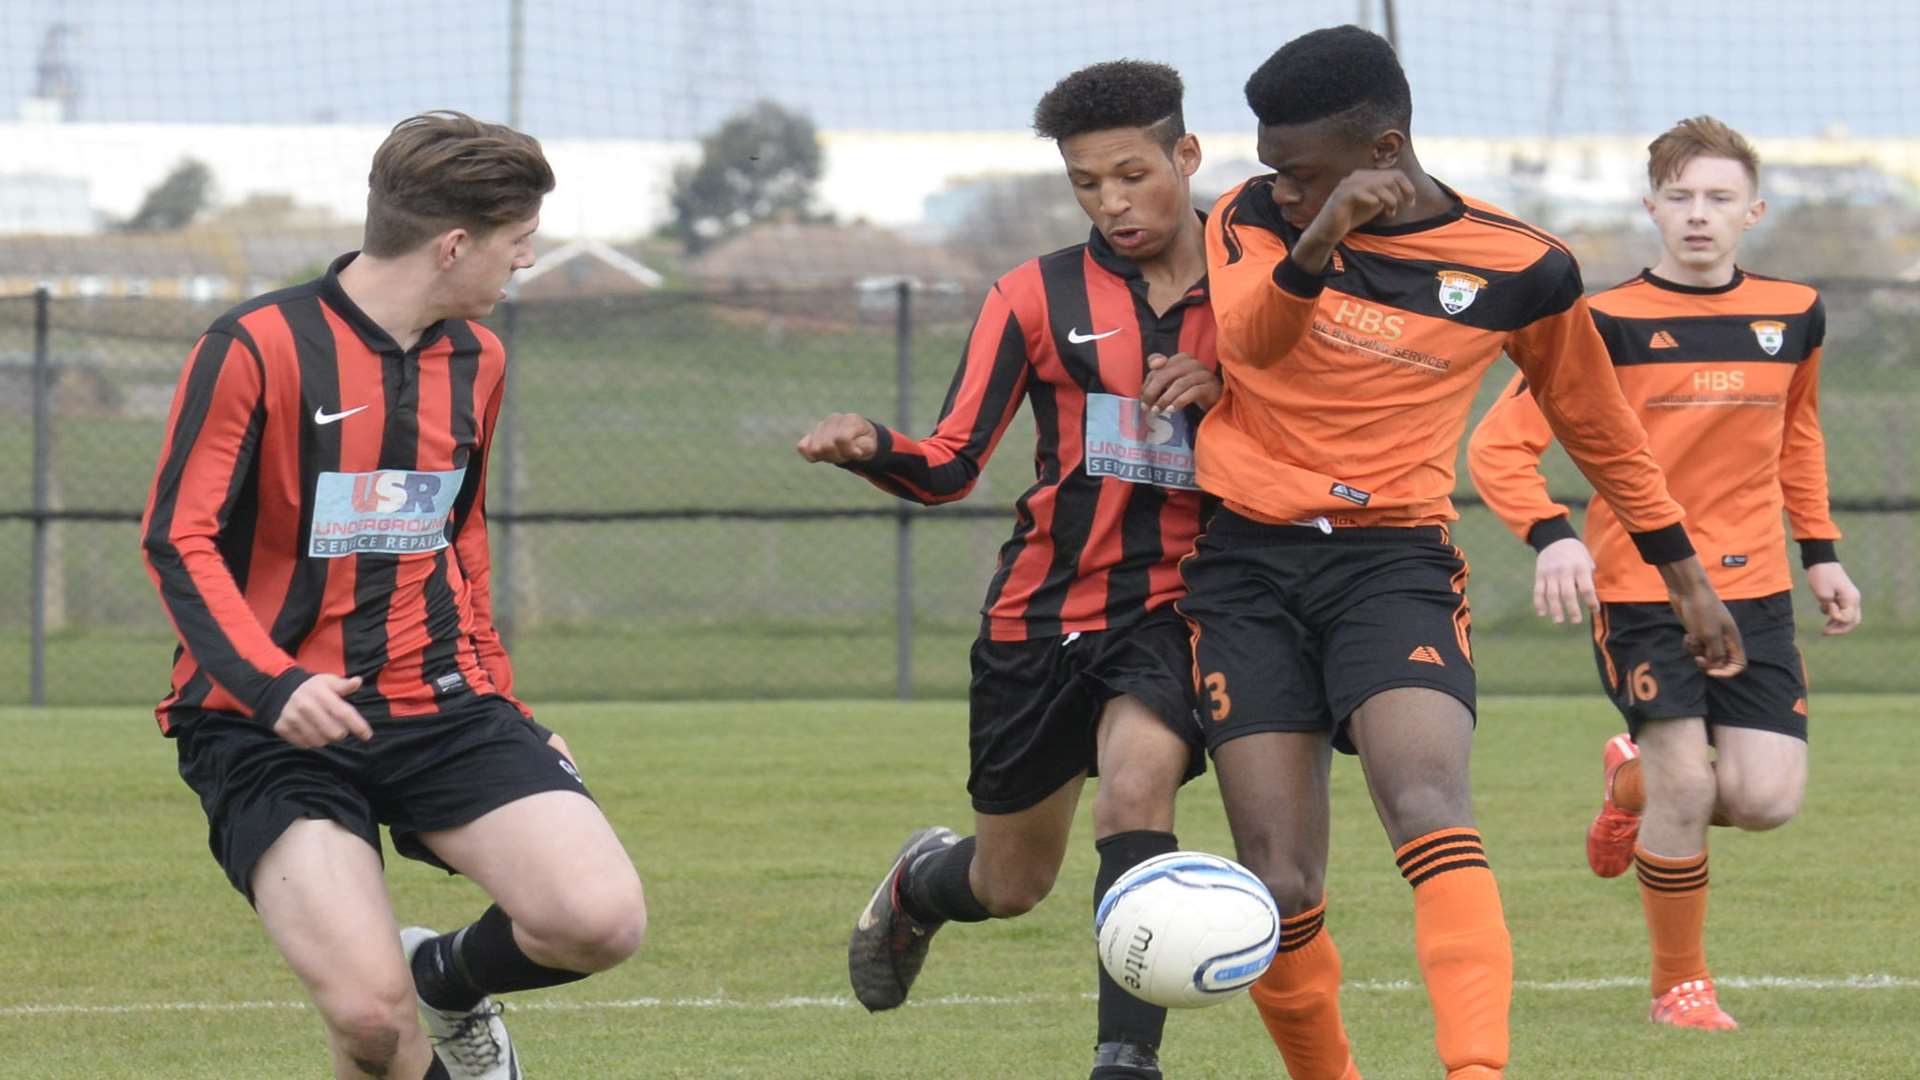 Lordswood Youth under-16s, in orange, battle Meopham Colts in the Medway Messenger Youth League's League Cup final Picture: Chris Davey